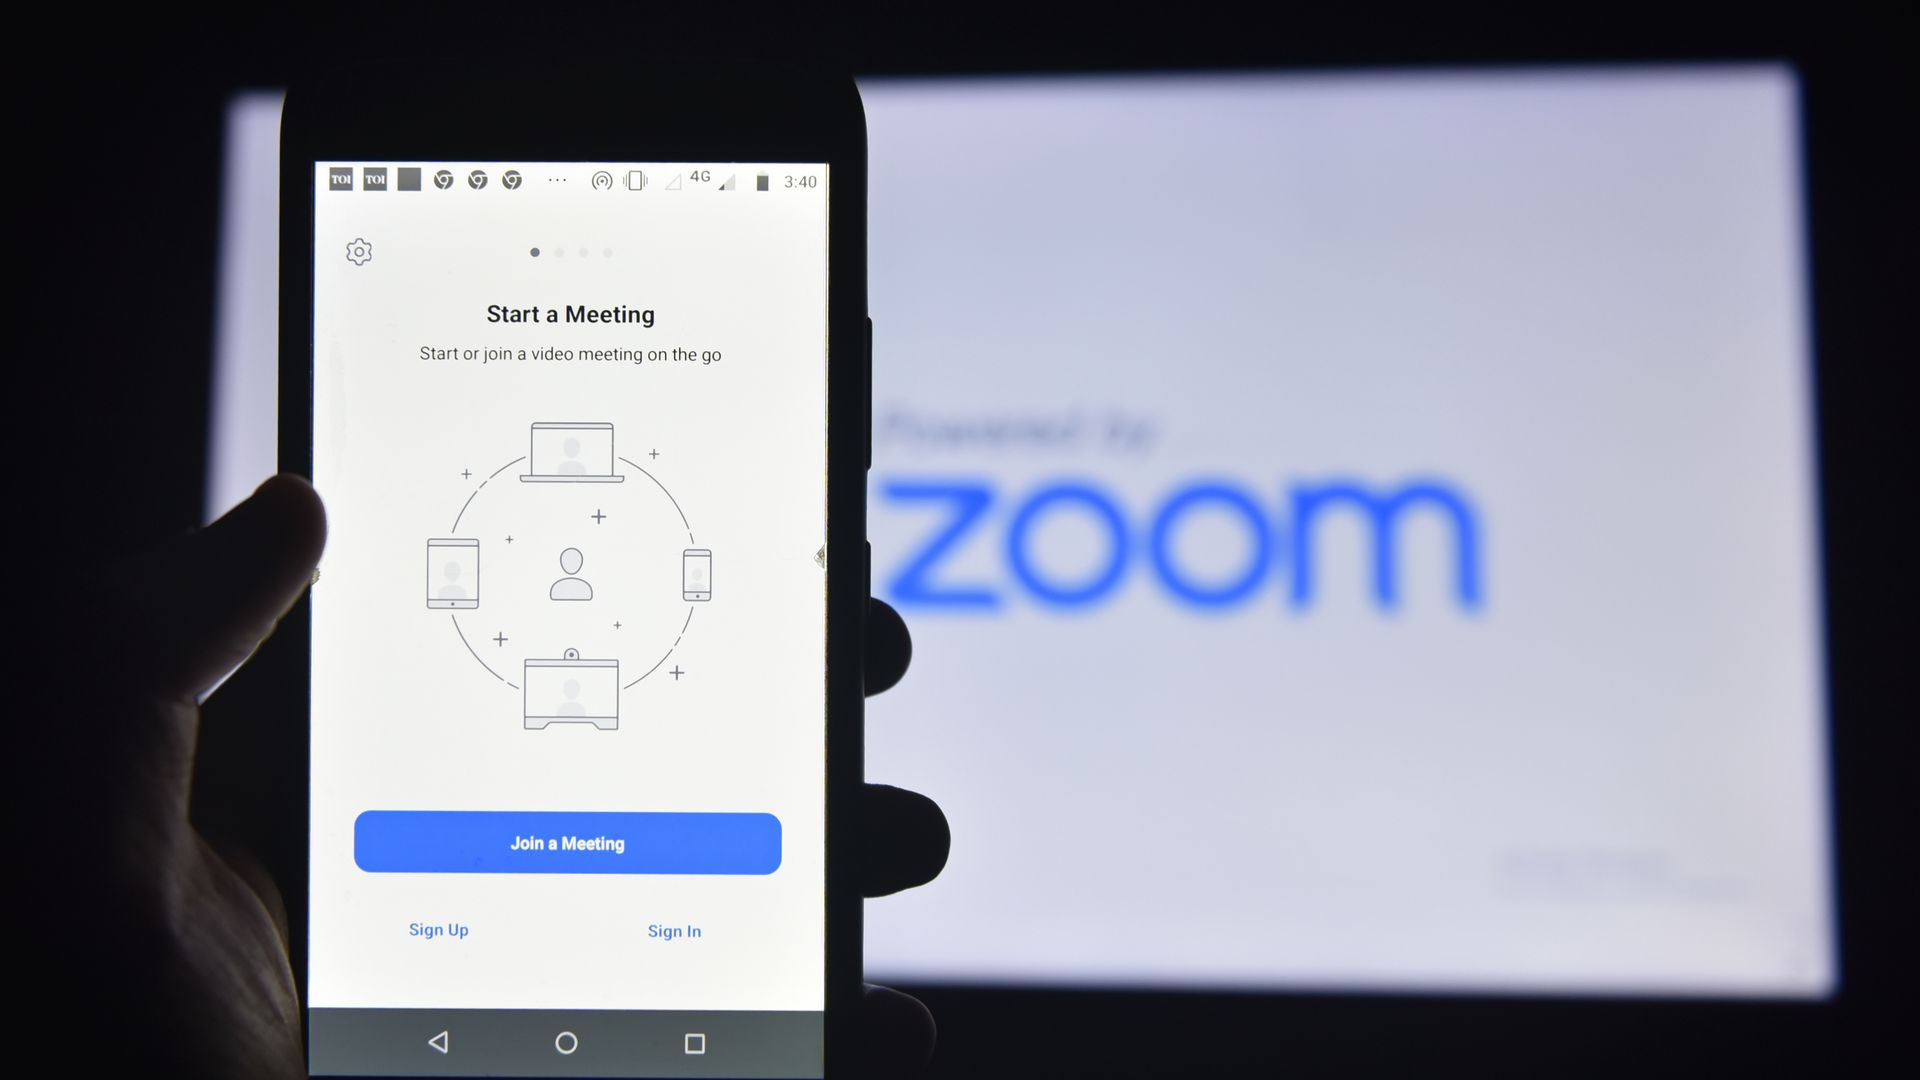 A photo of a smartphone displaying a Zoom meeting screen, with a larger screen displaying the Zoom logo in the background.